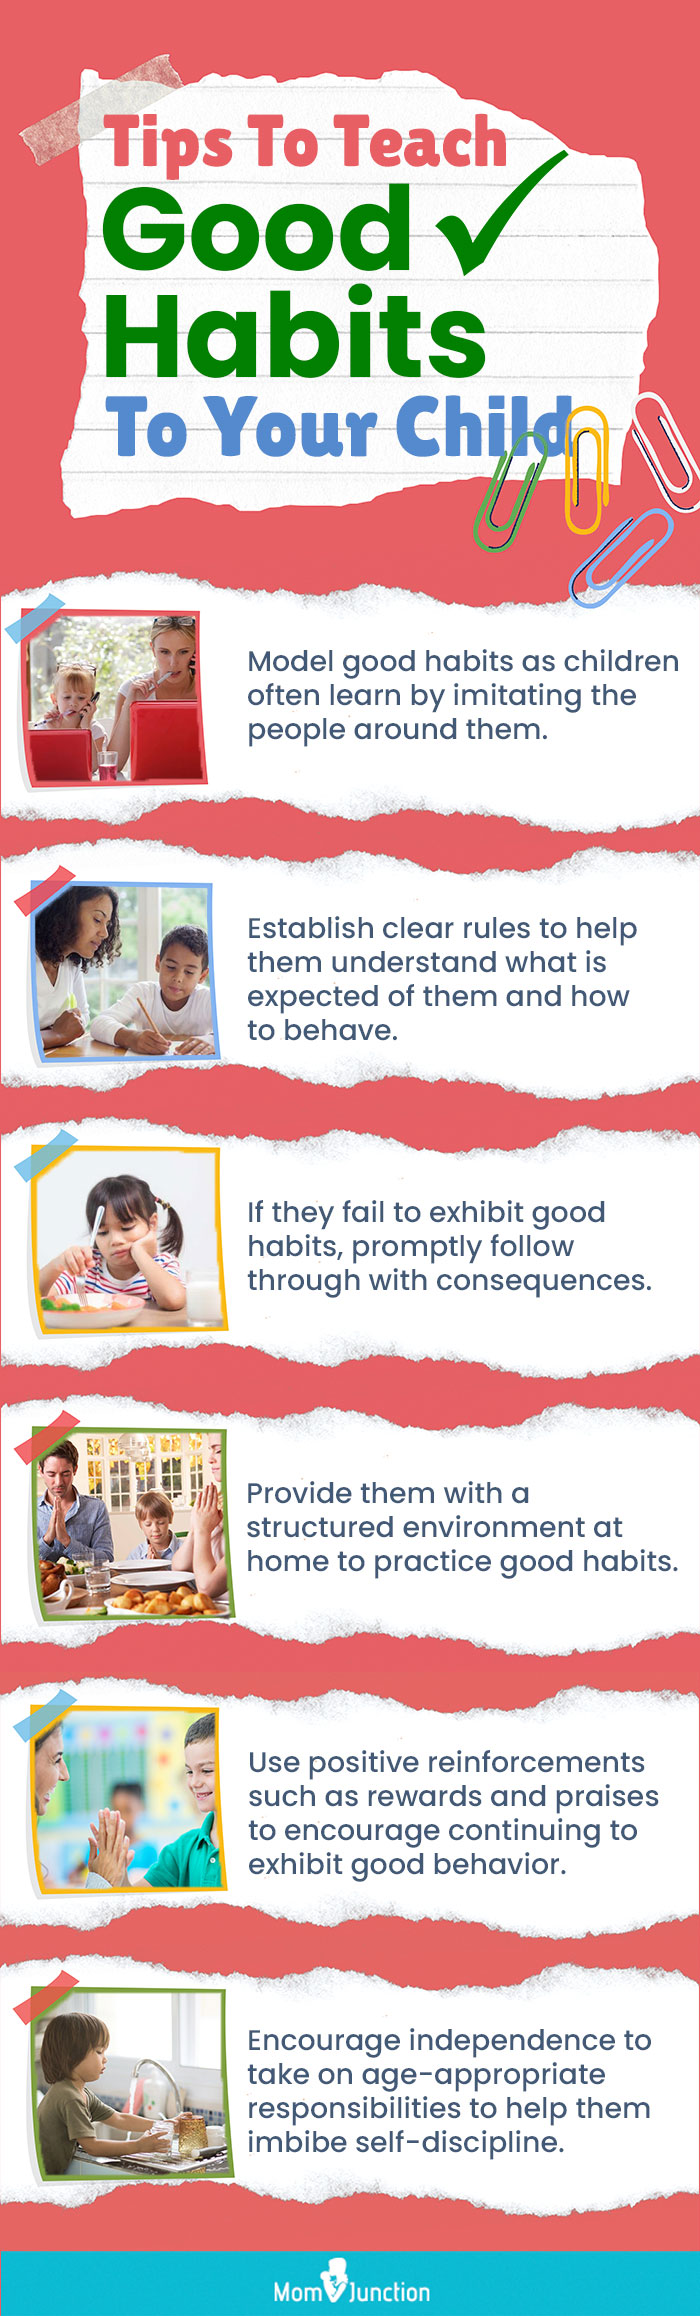 tips to teachh good habits (infographic)